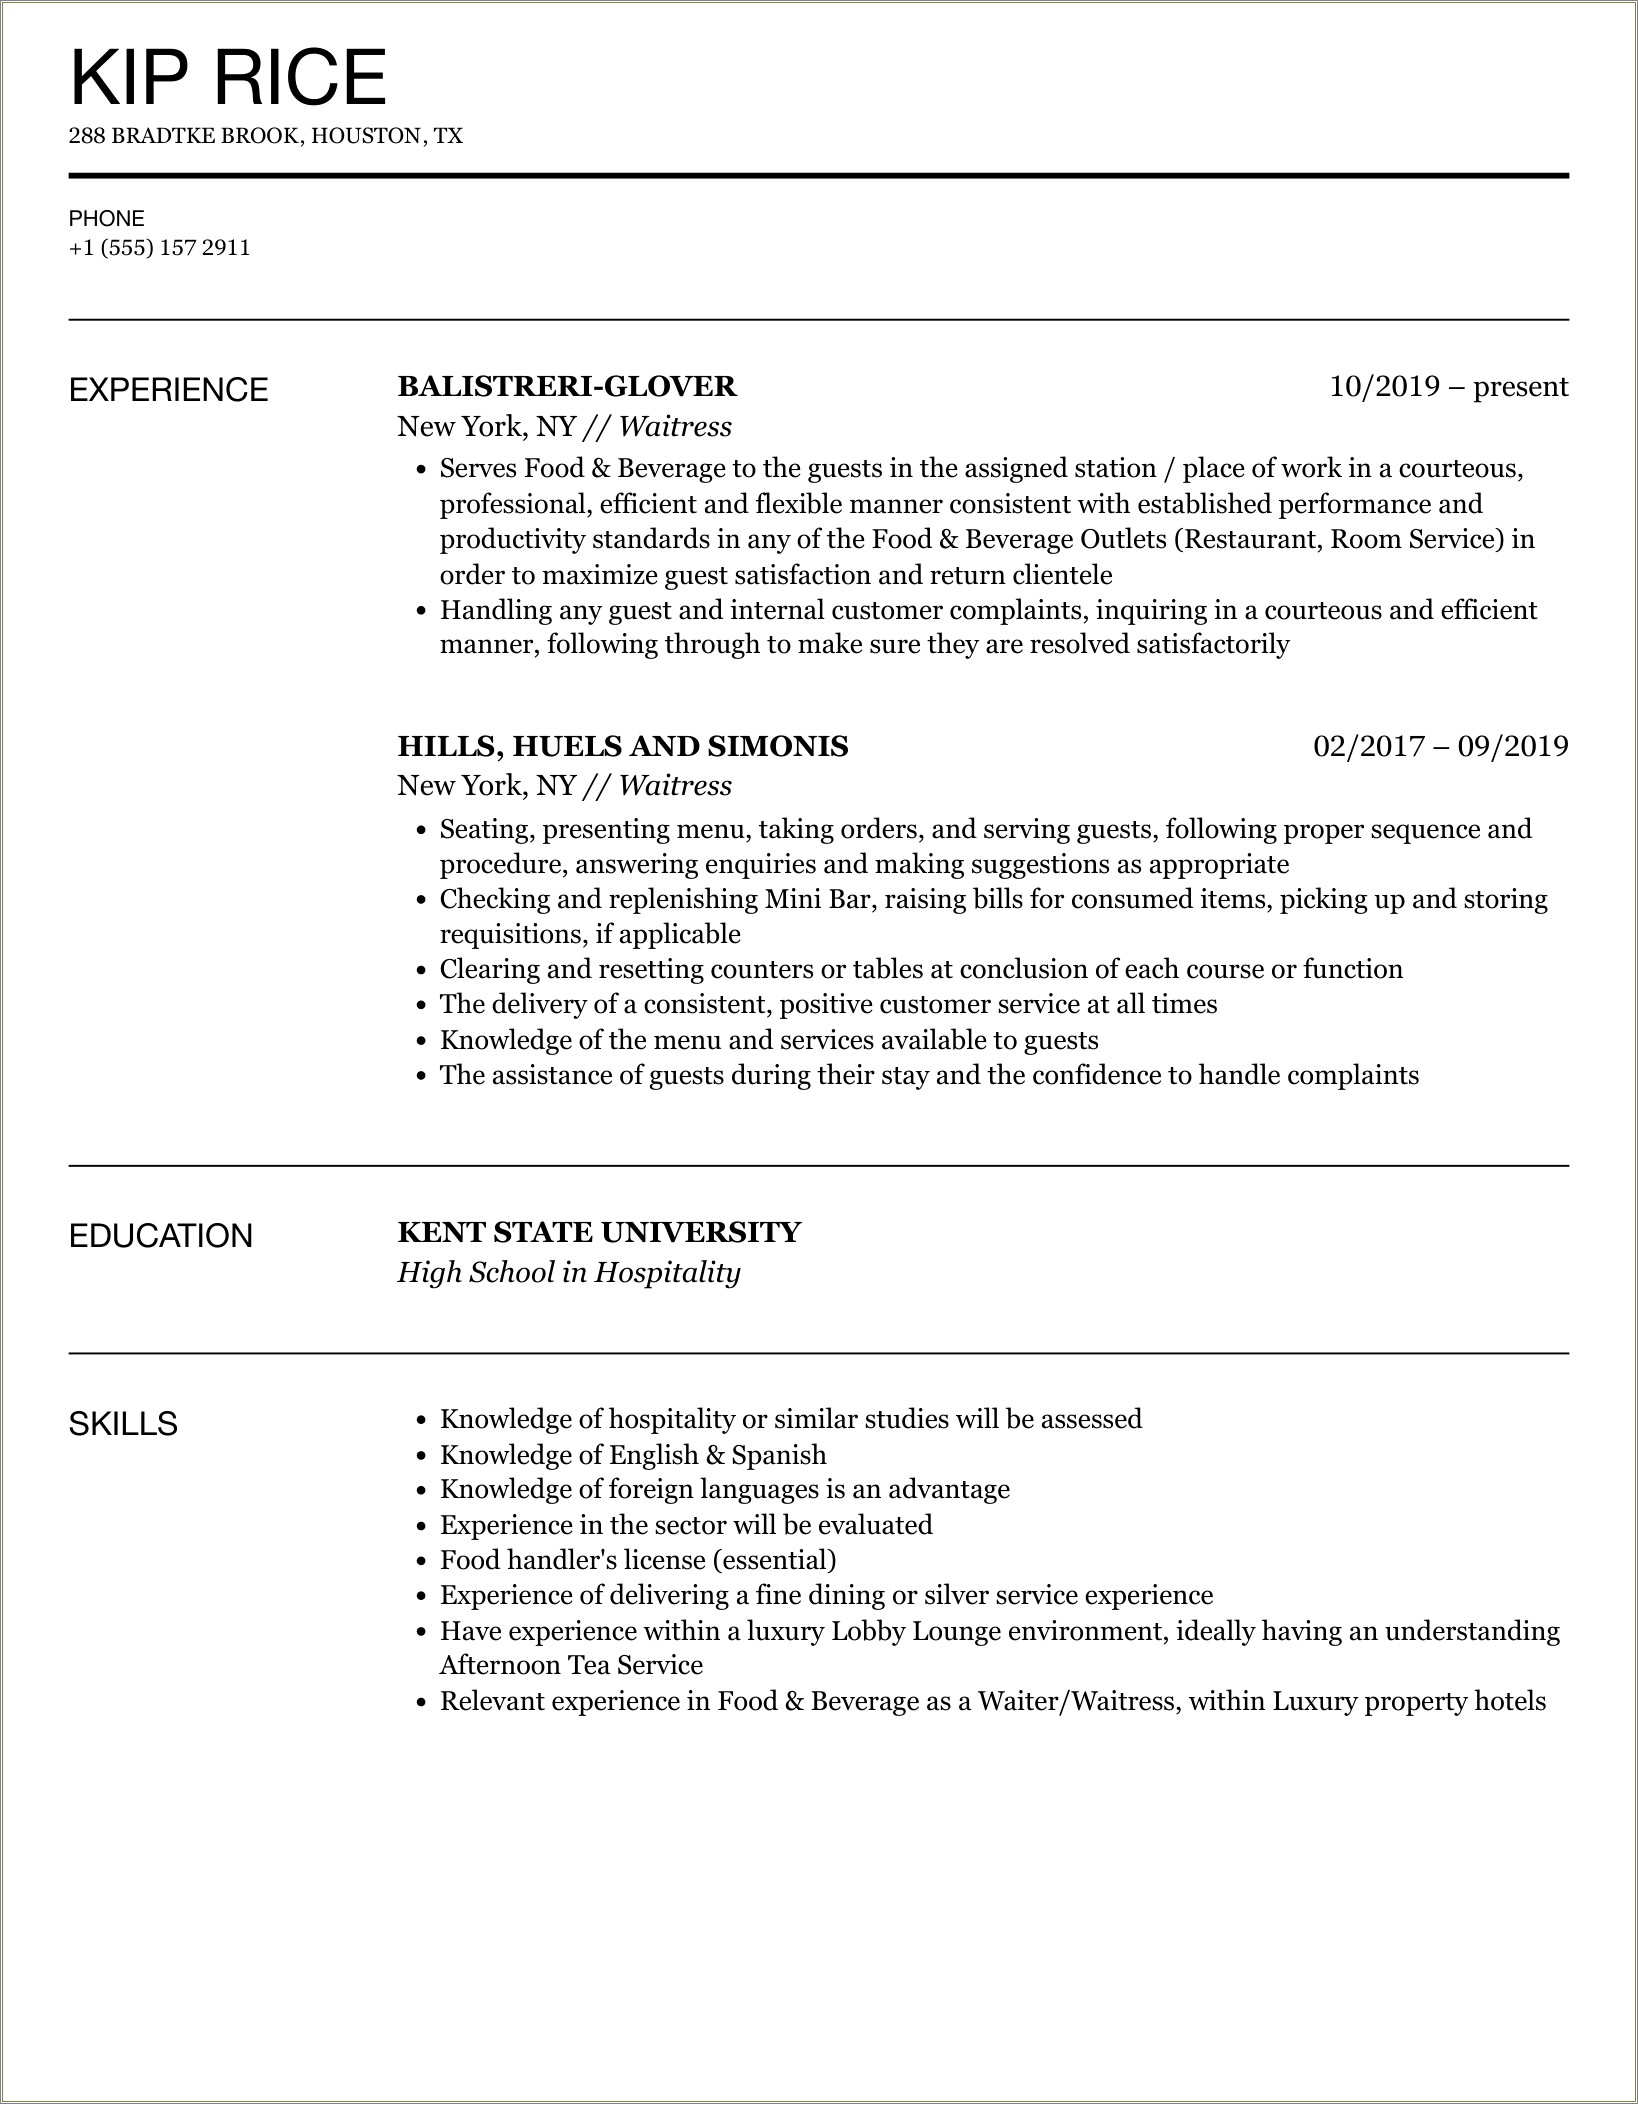 Resume For Waitress With No Experience